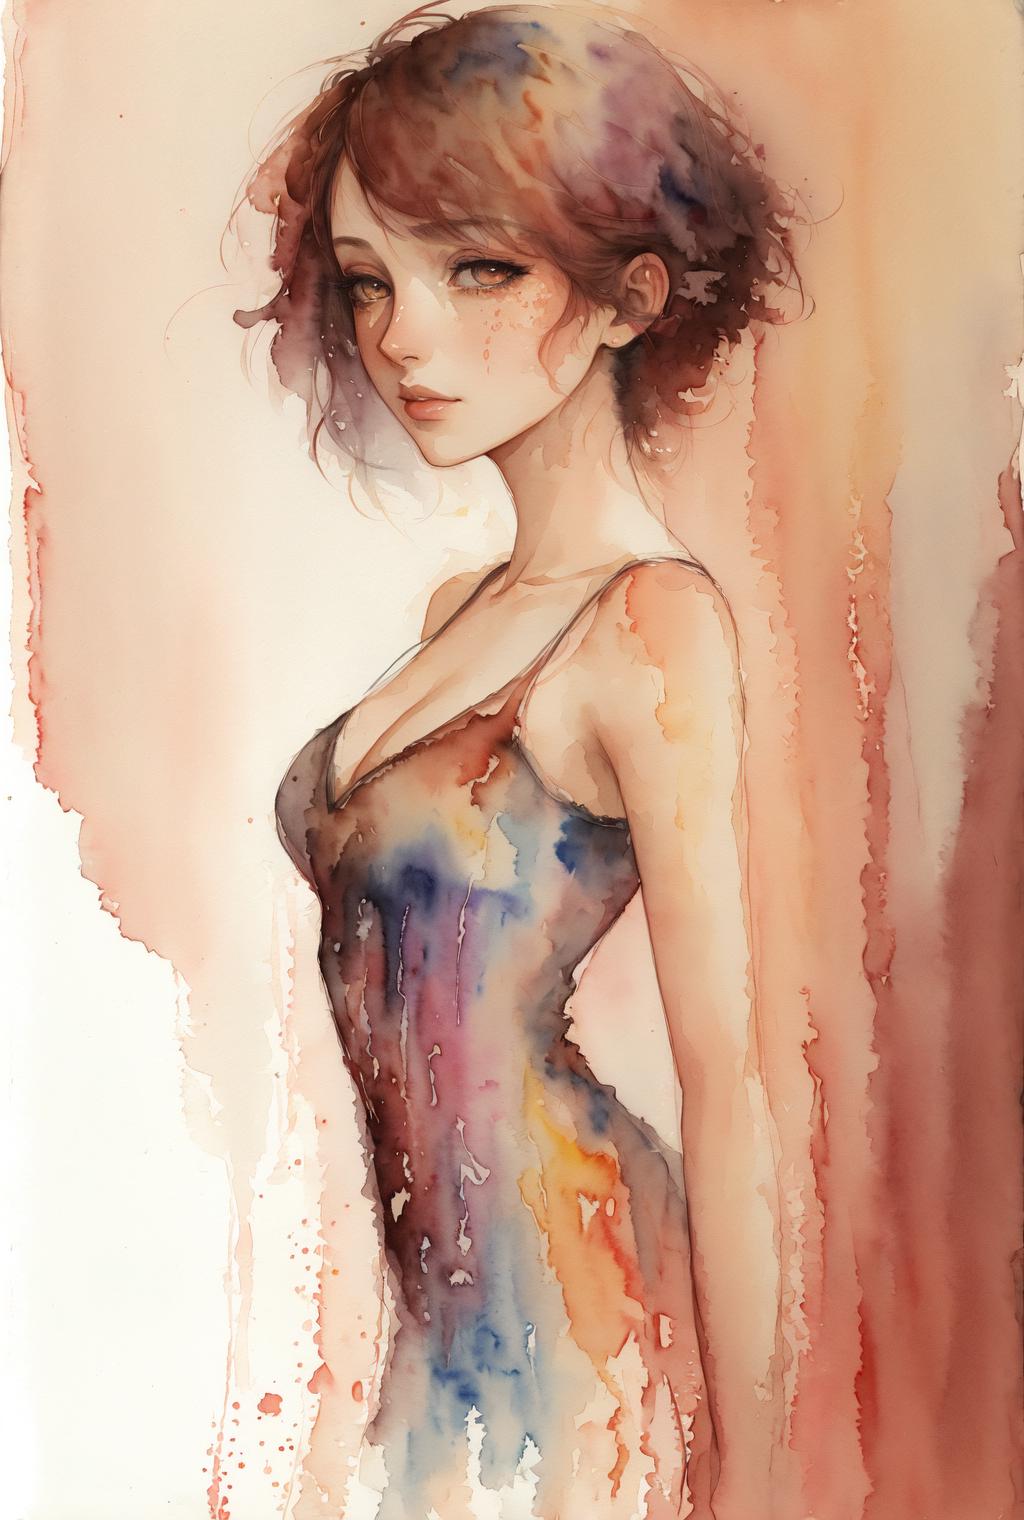 A vibrant painting of a woman in a dress with red hair.